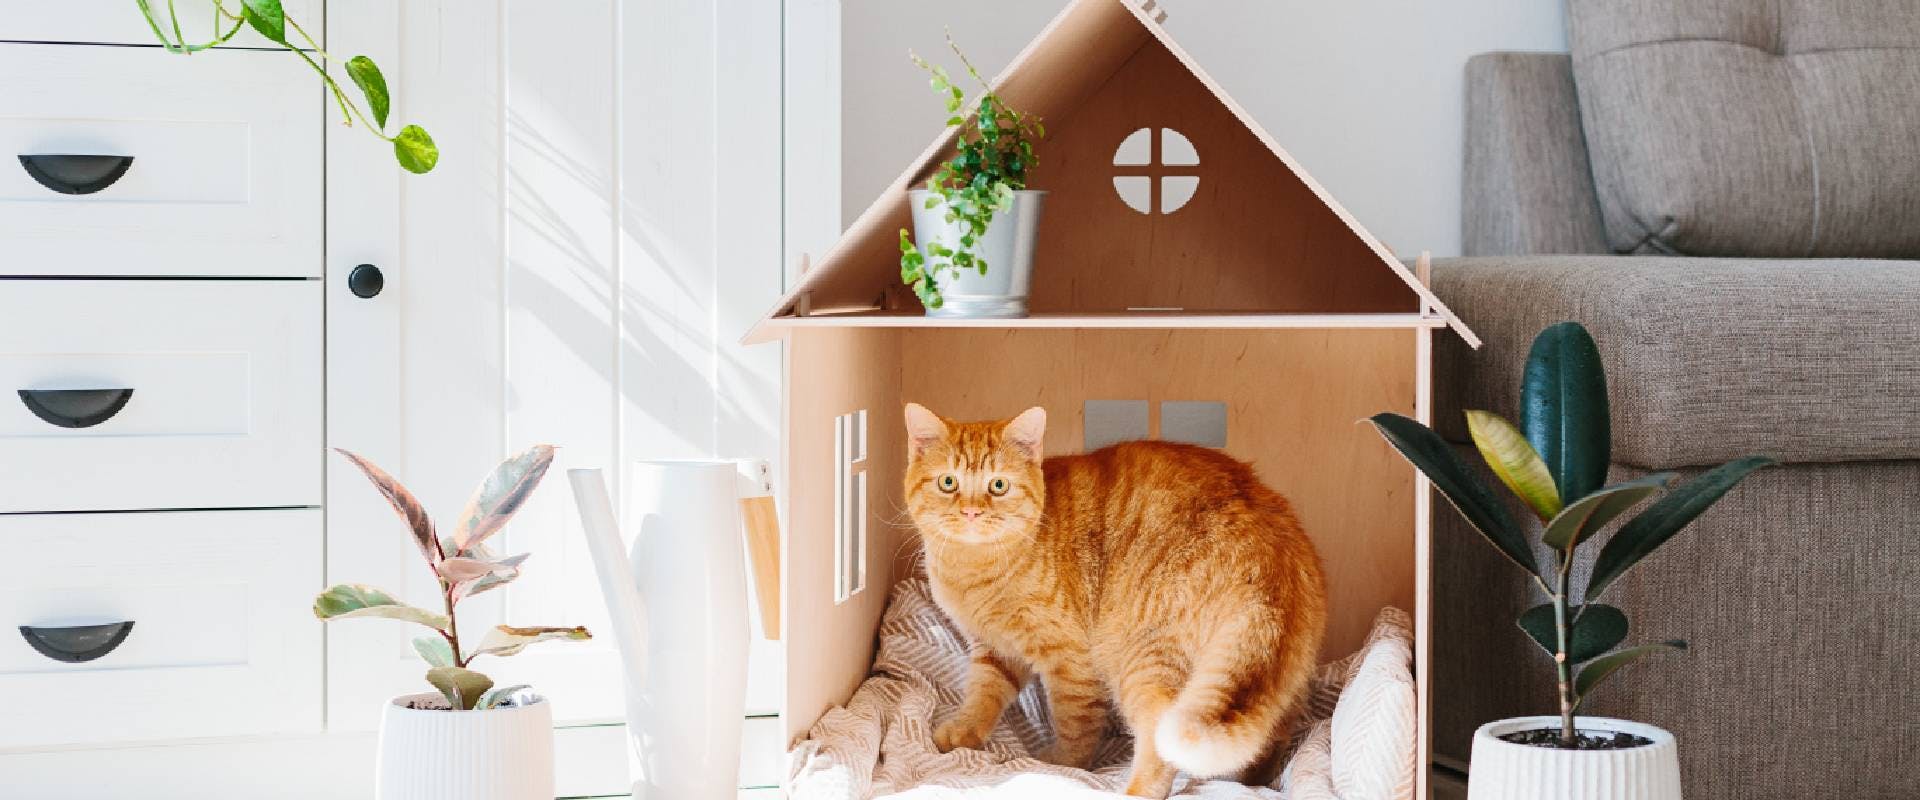 Ginger cat in a cat house